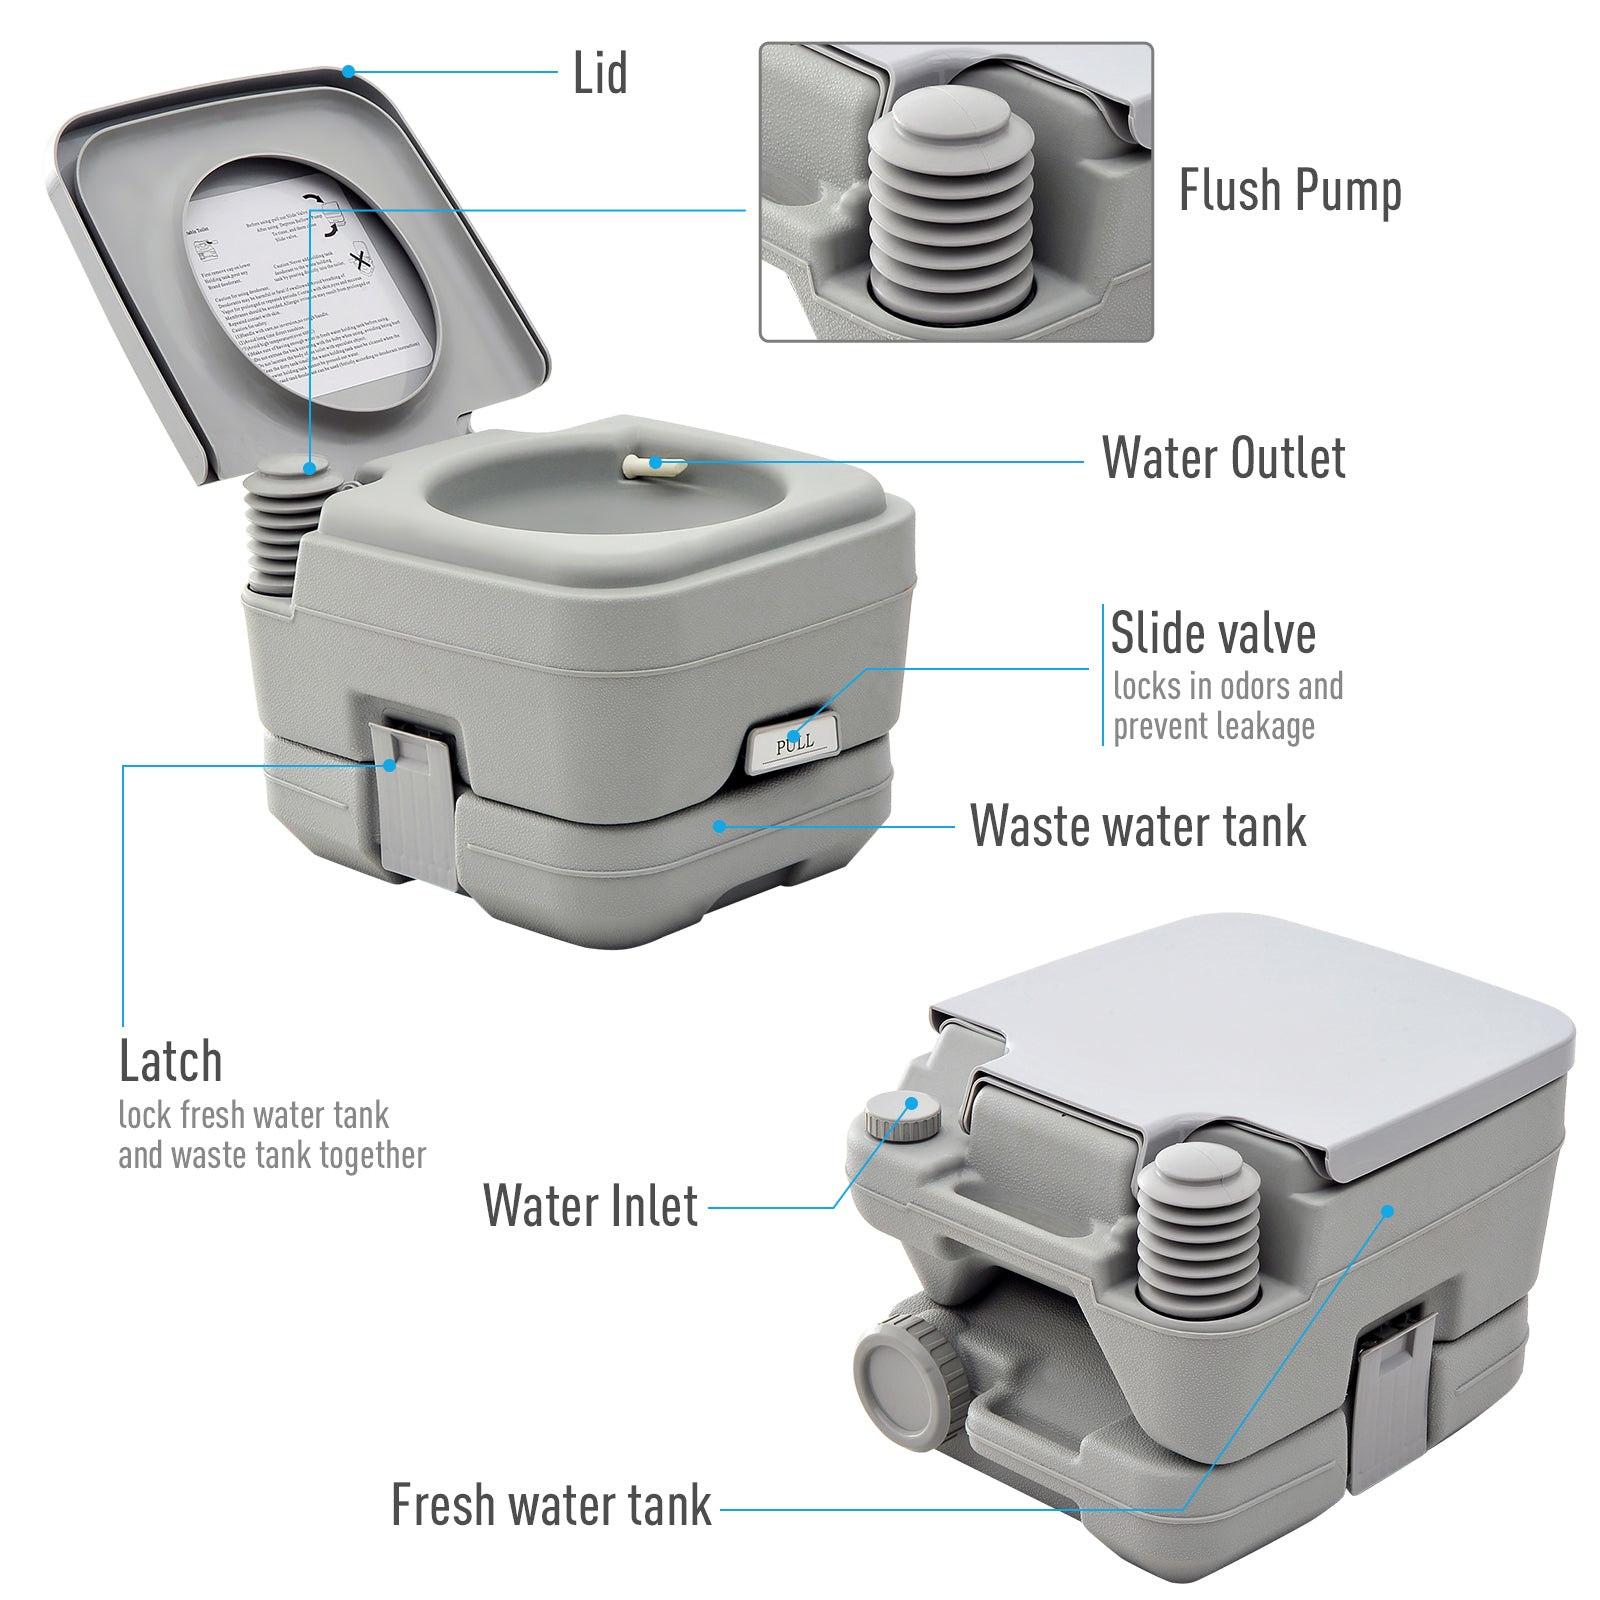 10L Portable Travel Toilet Outdoor Camping Picnic with 2 Detachable Tanks & Push-button Operation, Grey-3